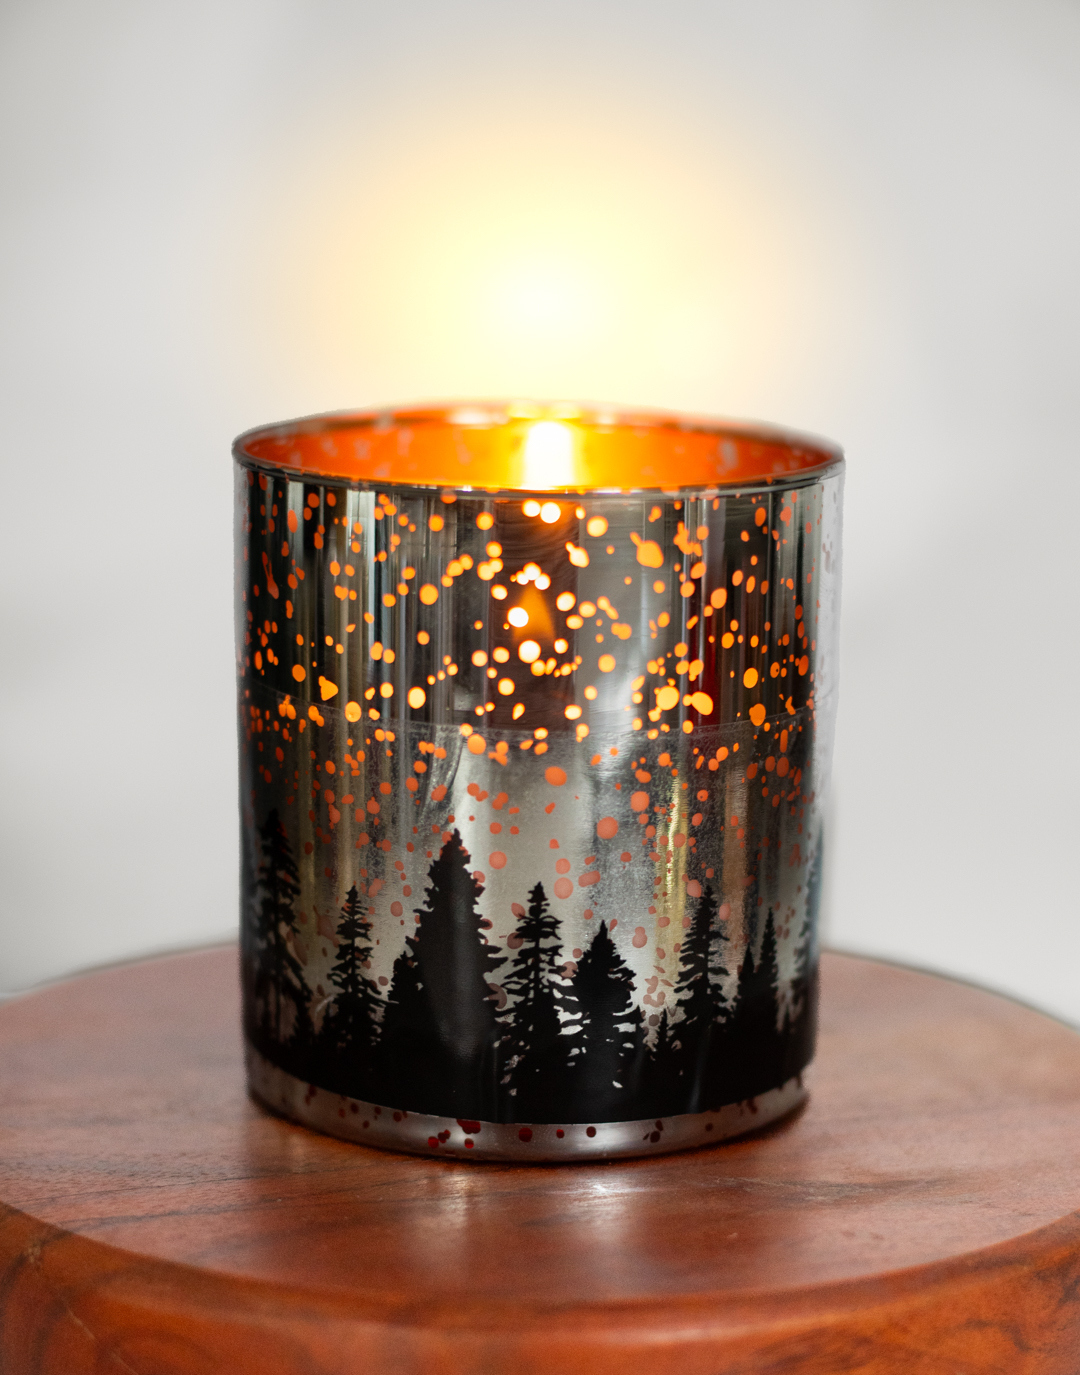 A silver three-wick candle with black tree-shaped images lining the bottom half of the container. The candle is lit and you can see light from the flame peeking through small areas of the container.